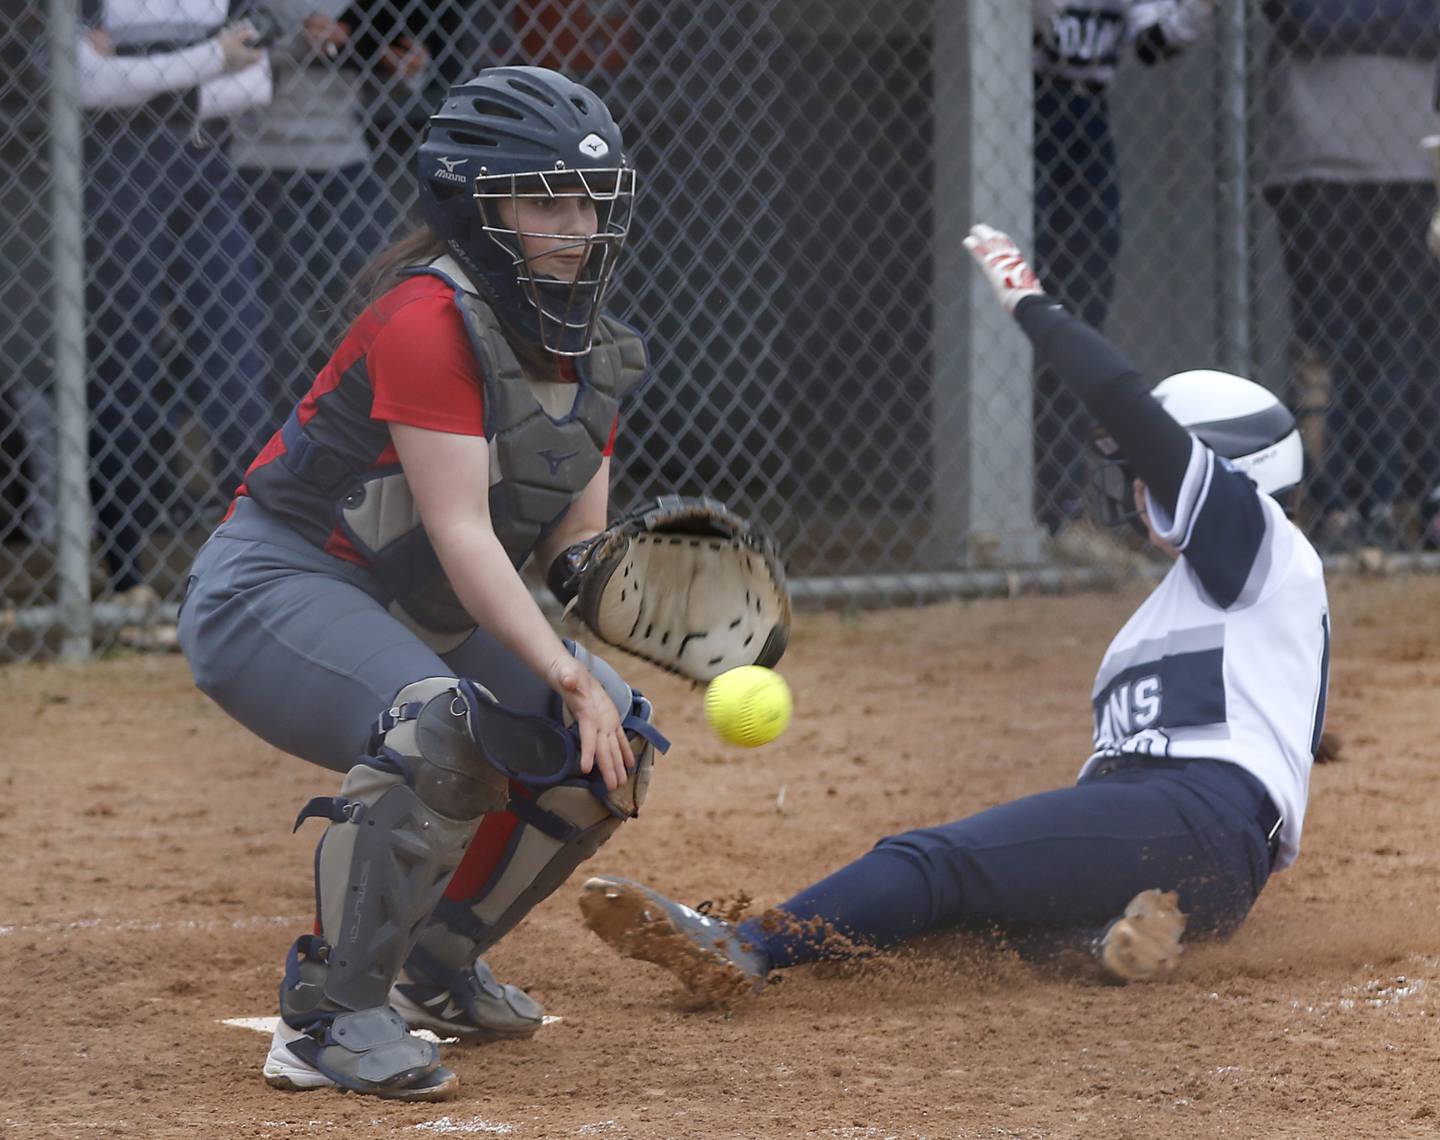 Dundee-Crown’s Faith Dierwechter tries to field the throw as Cary-Grove’s Mia Olson scores a run during a Fox Valley Conference softball game Monday, April 4, 2022, between Cary-Grove and Dundee-Crown at Cary-Grove High School.